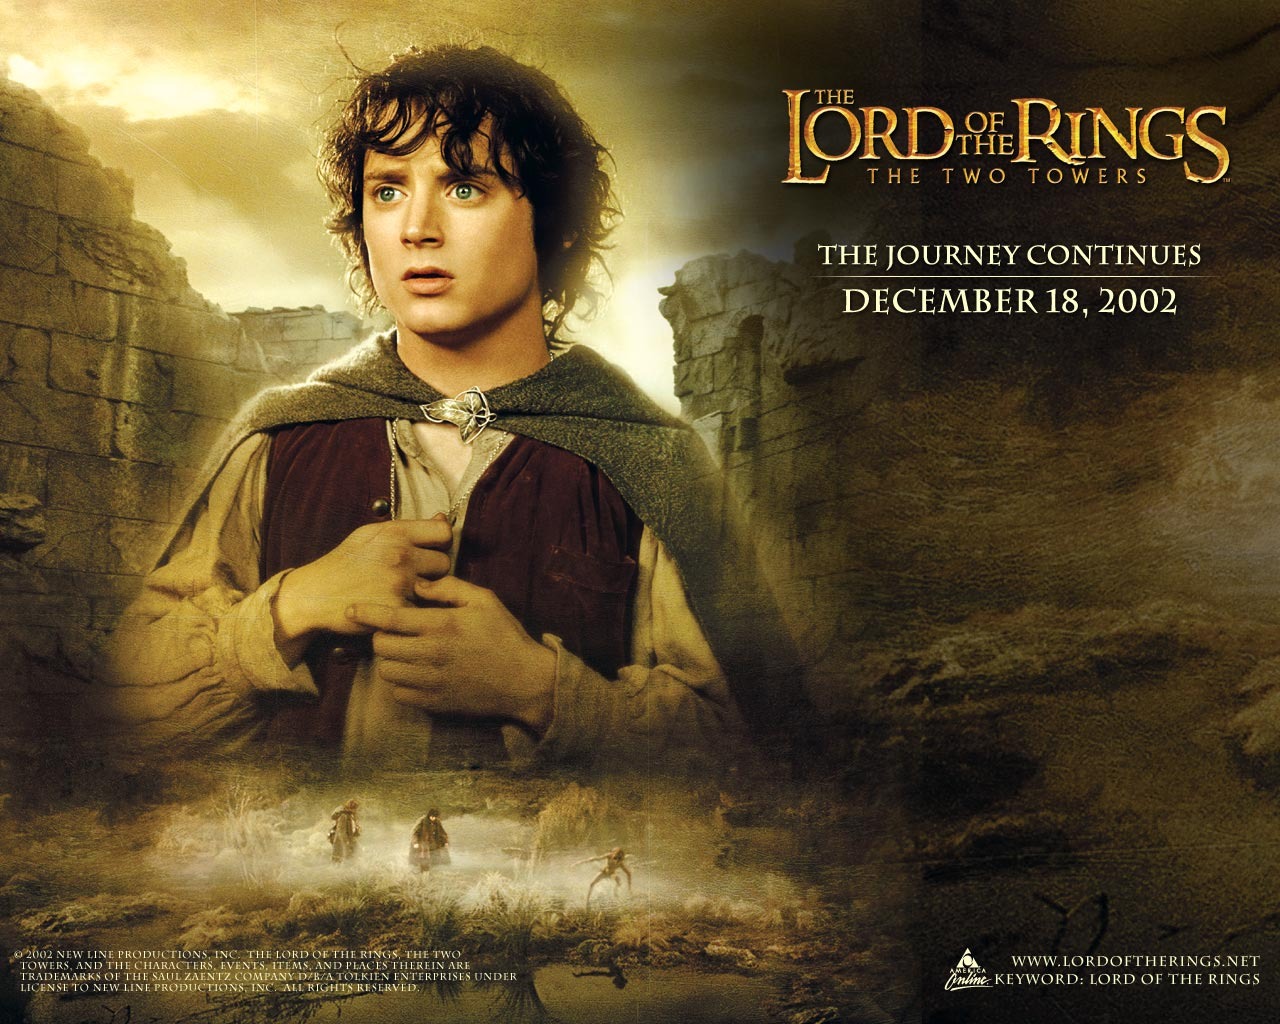 The Lord of the Rings 指環王 #1 - 1280x1024